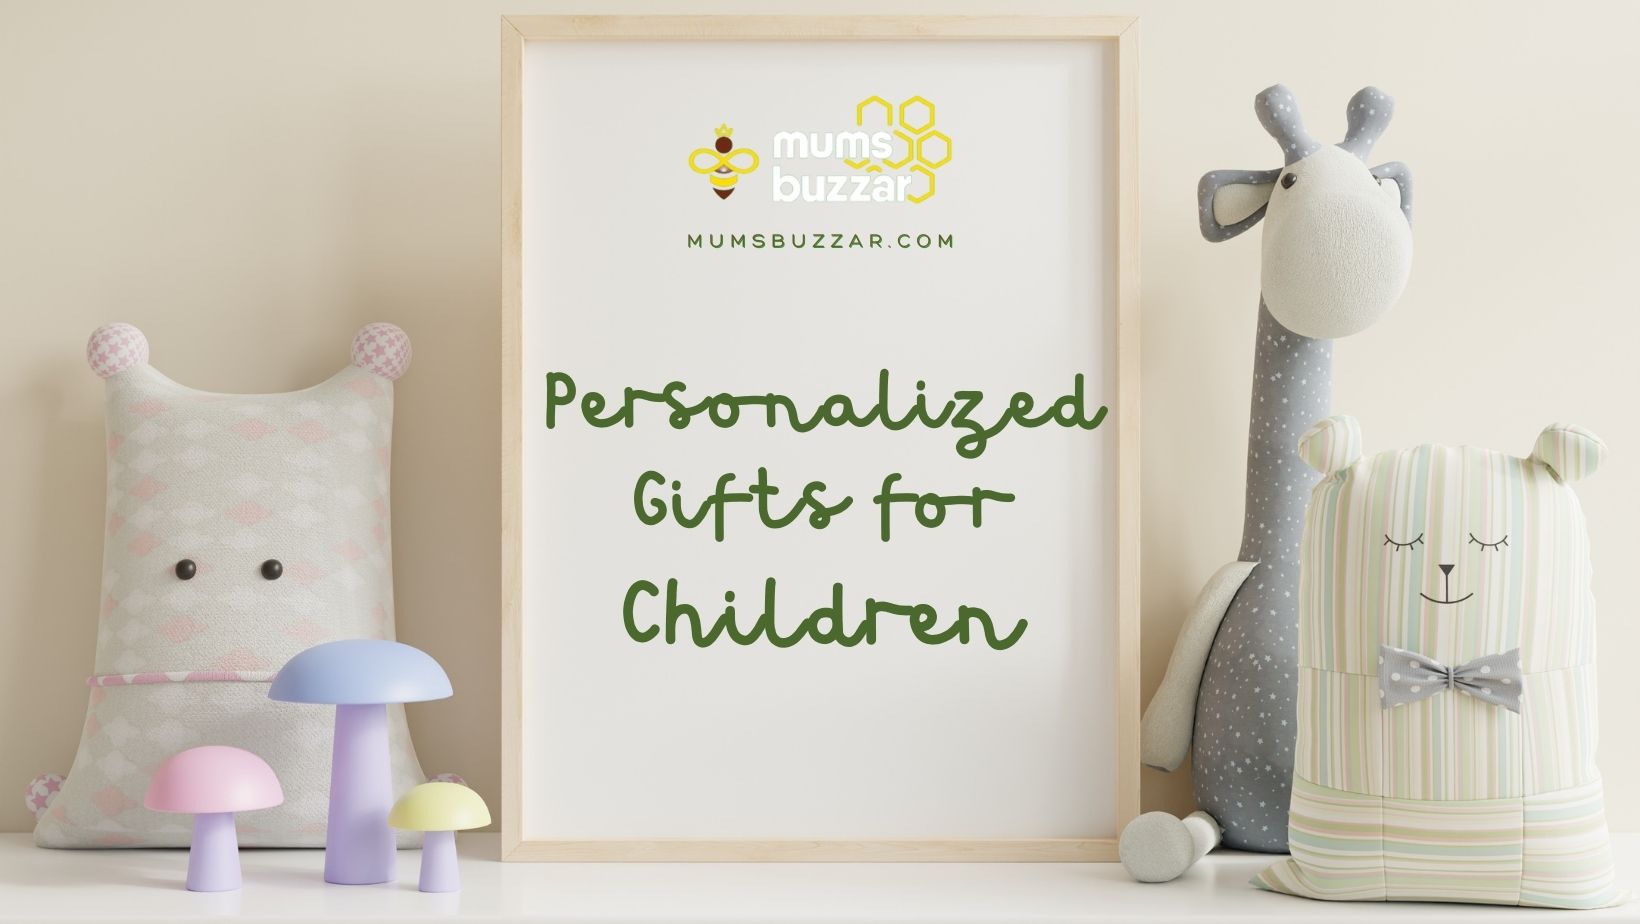 Personalized Gifts for Children